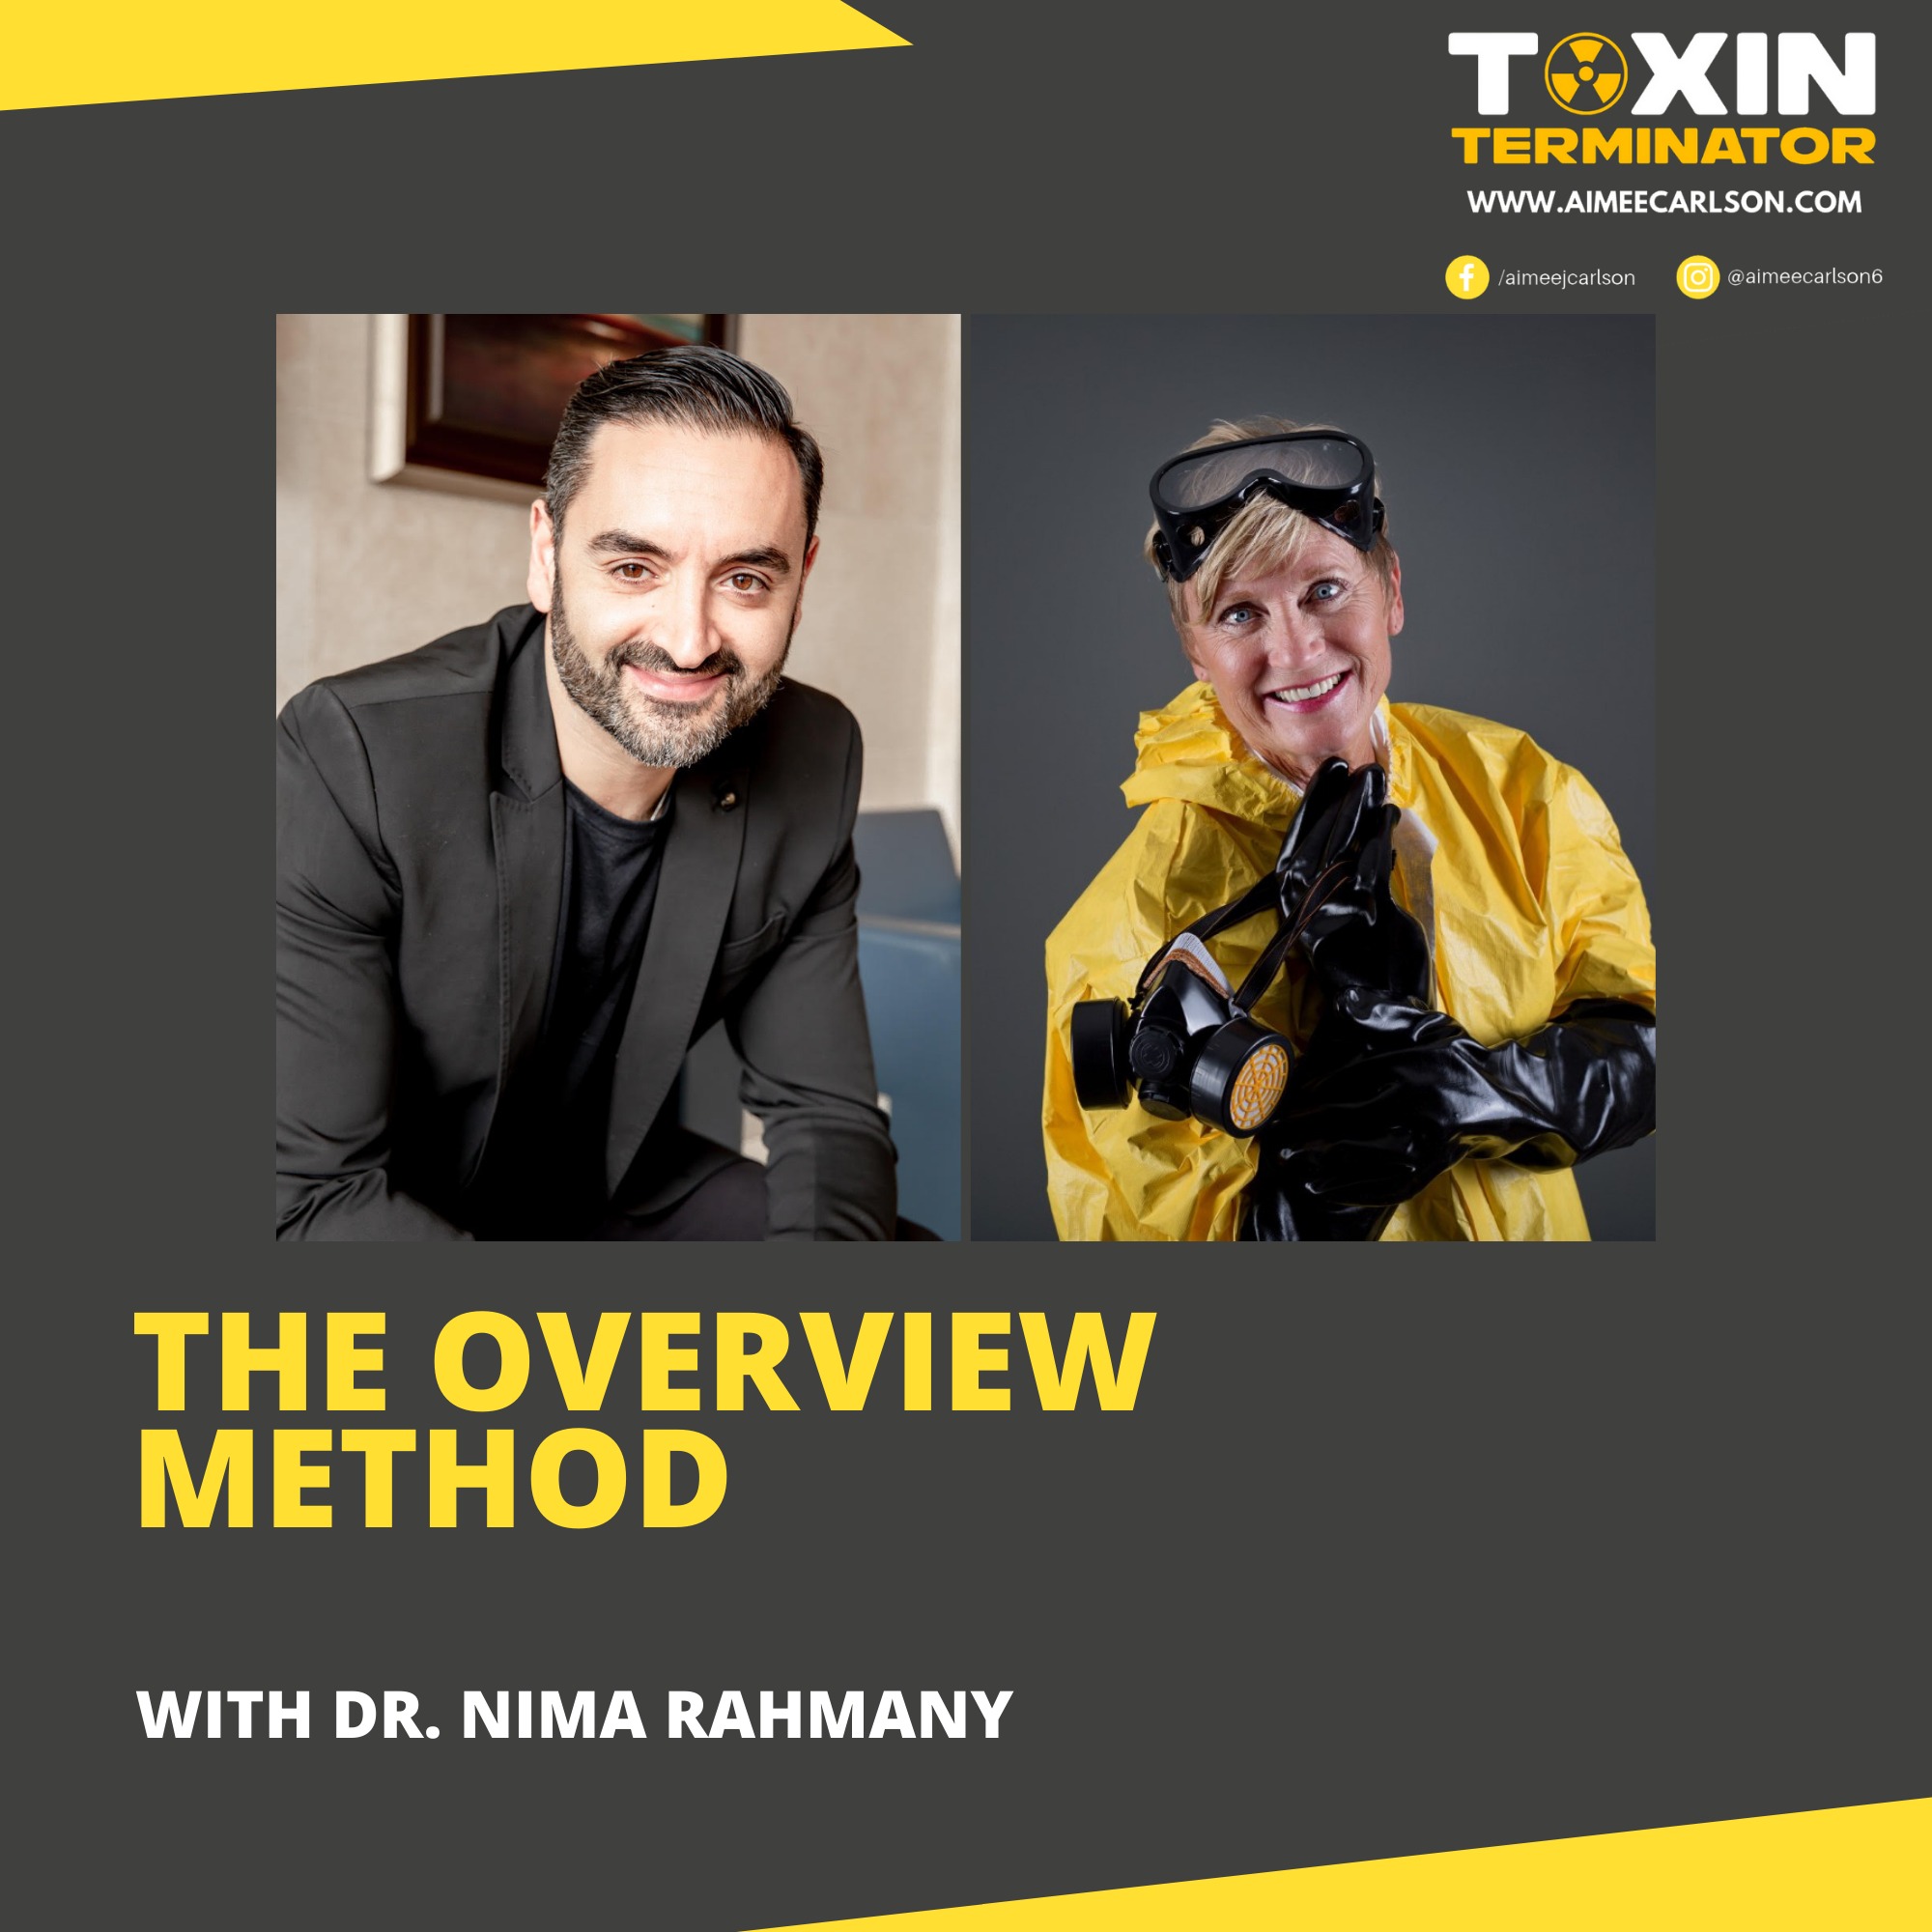 The Overview Method with Dr. Nima